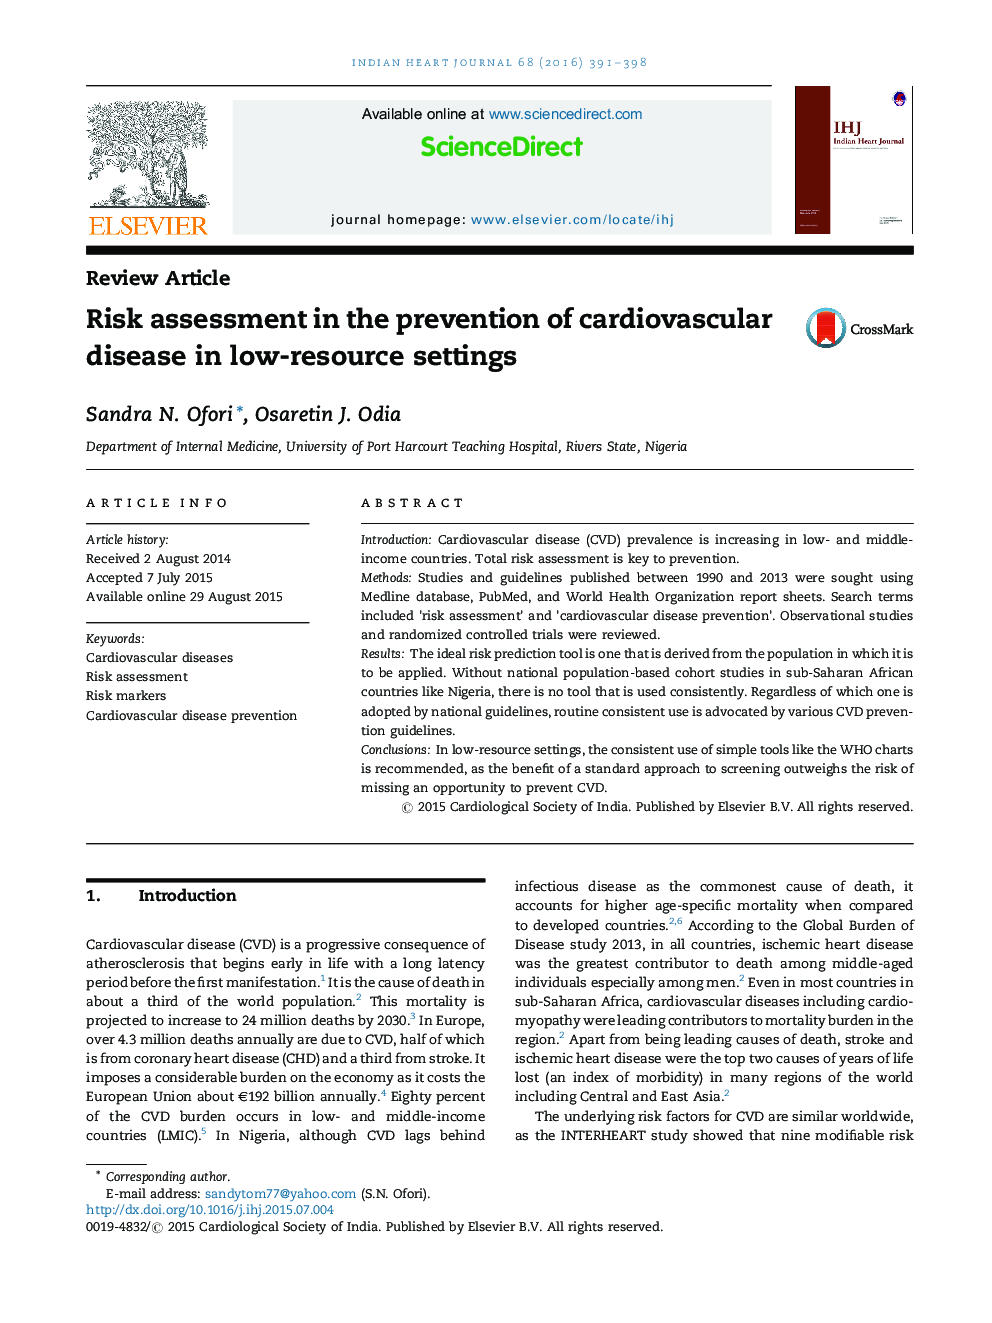 Risk assessment in the prevention of cardiovascular disease in low-resource settings